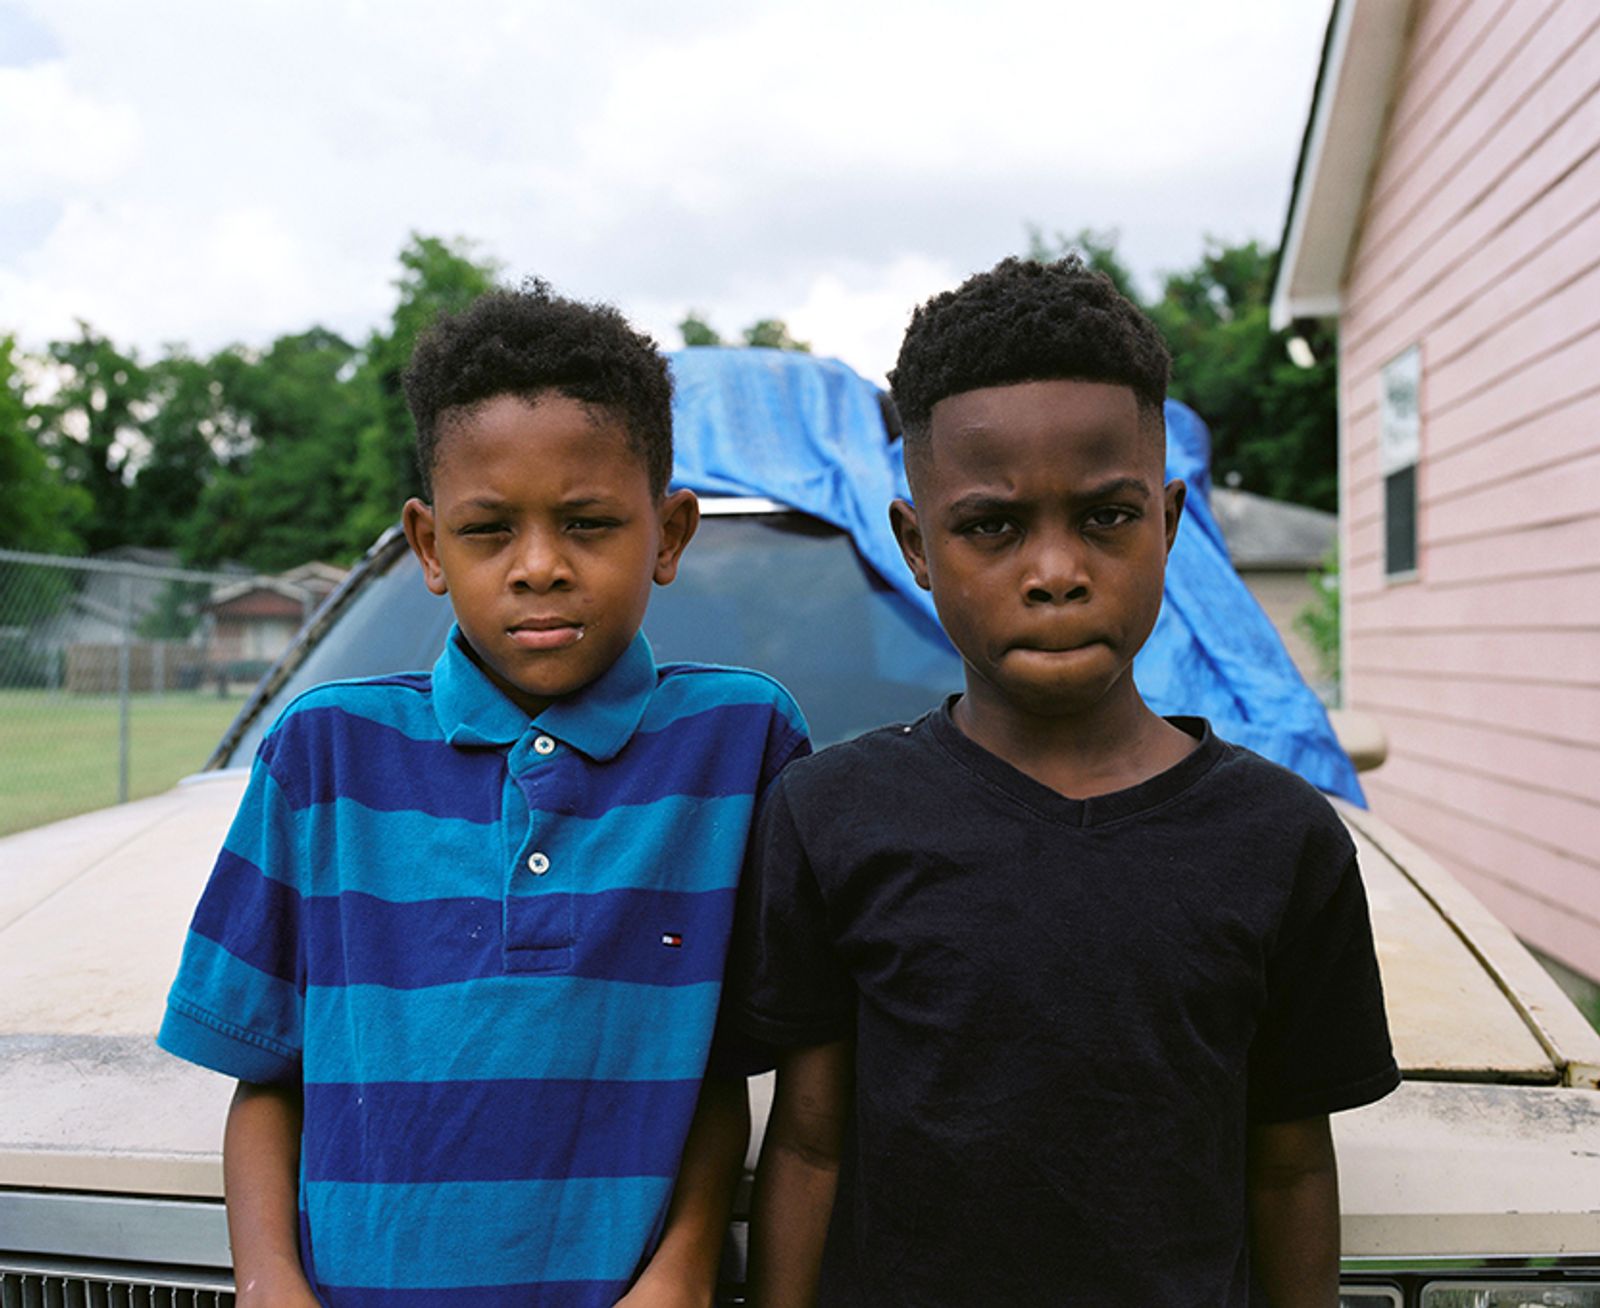 © Mélanie Desriaux - Image from the The passengers of the Mississippi photography project